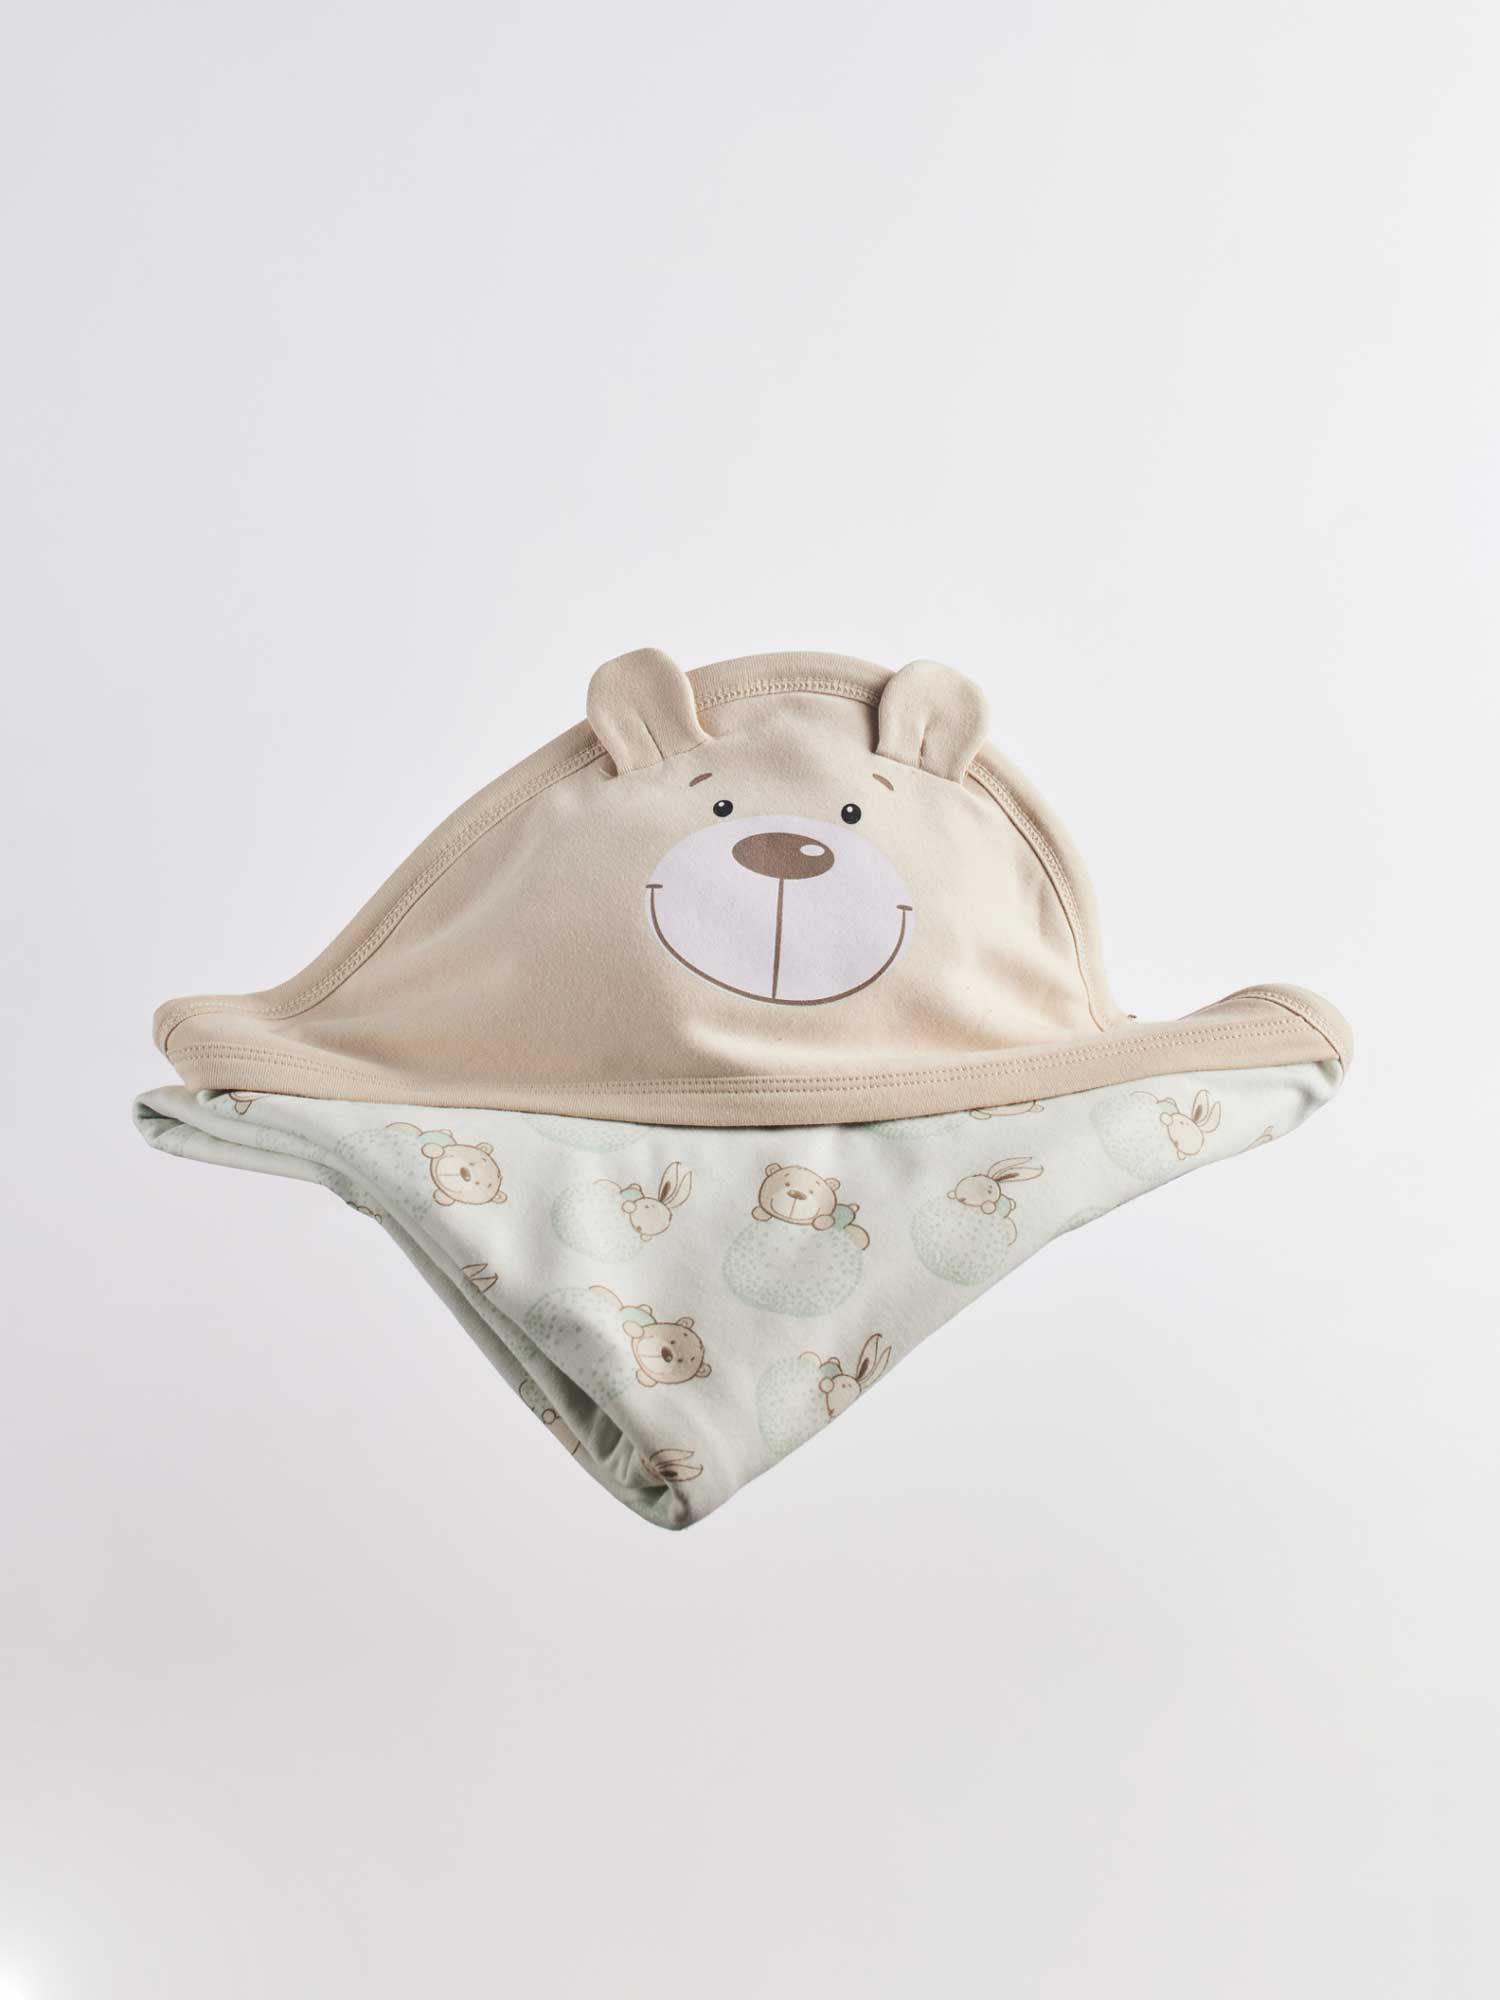 Baby Blanket Bear and Bunny was designed with comfort in mind! It features a soft cotton fabric with a light and breathable material that is perfect for all seasons. The eye-catching patterned print will add a modern look to your baby's room. 